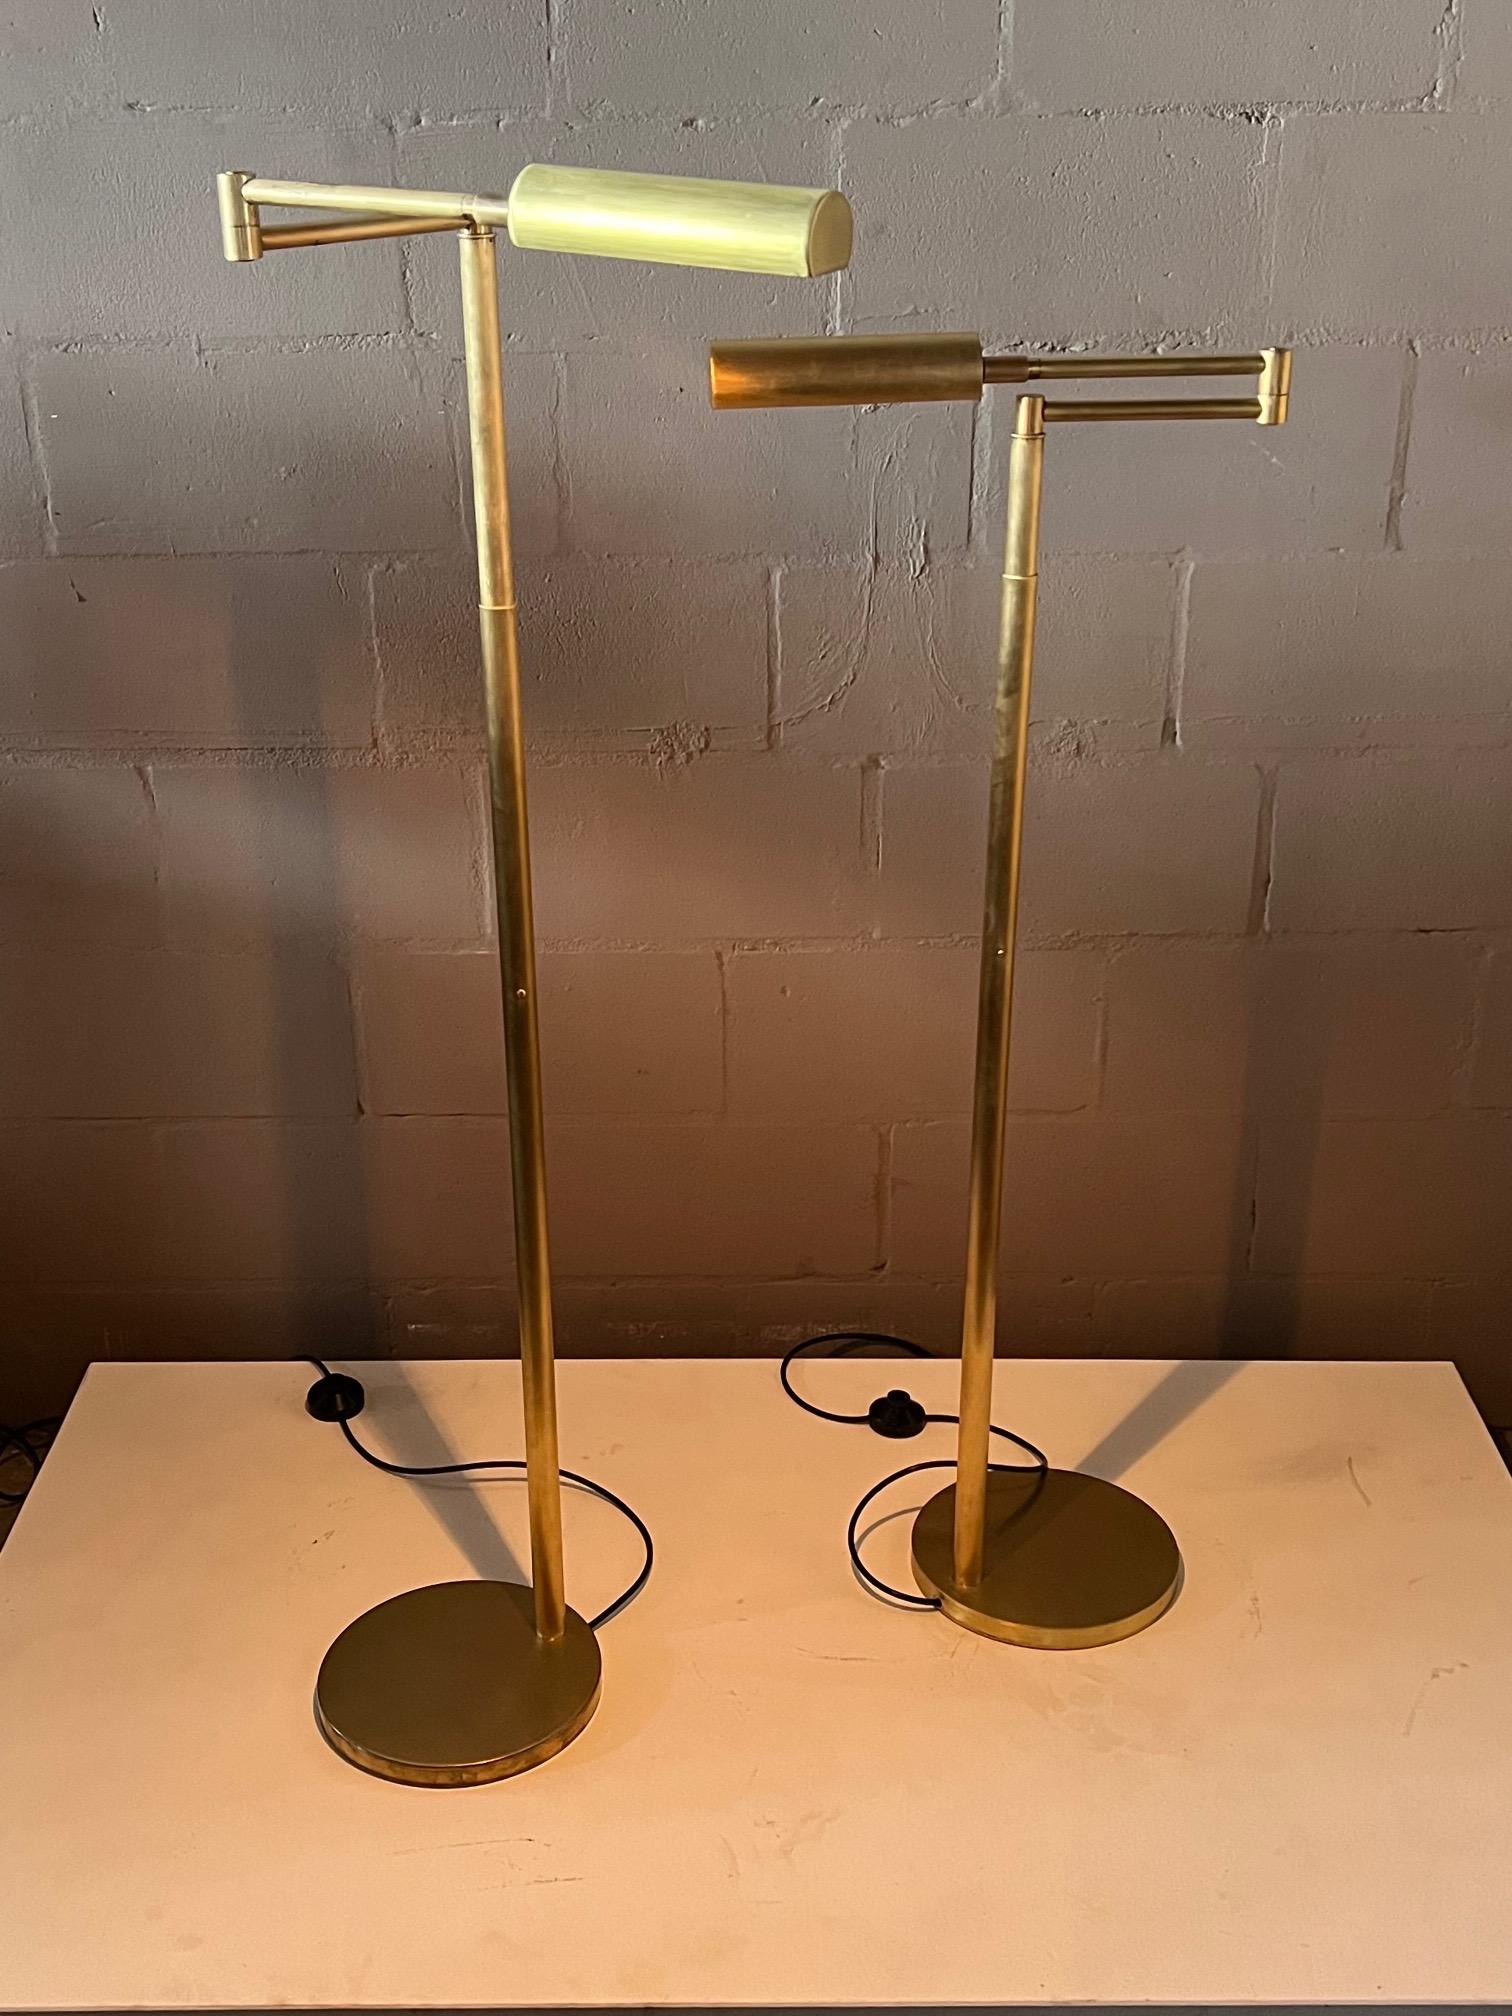 A pair of brass reading lamps by Koch & Lowy, stamped OMI. Articulated shades create many possibilities. Satin brushed finish with some patina and discoloration. Original porcelain sockets, rewired with foot switches.